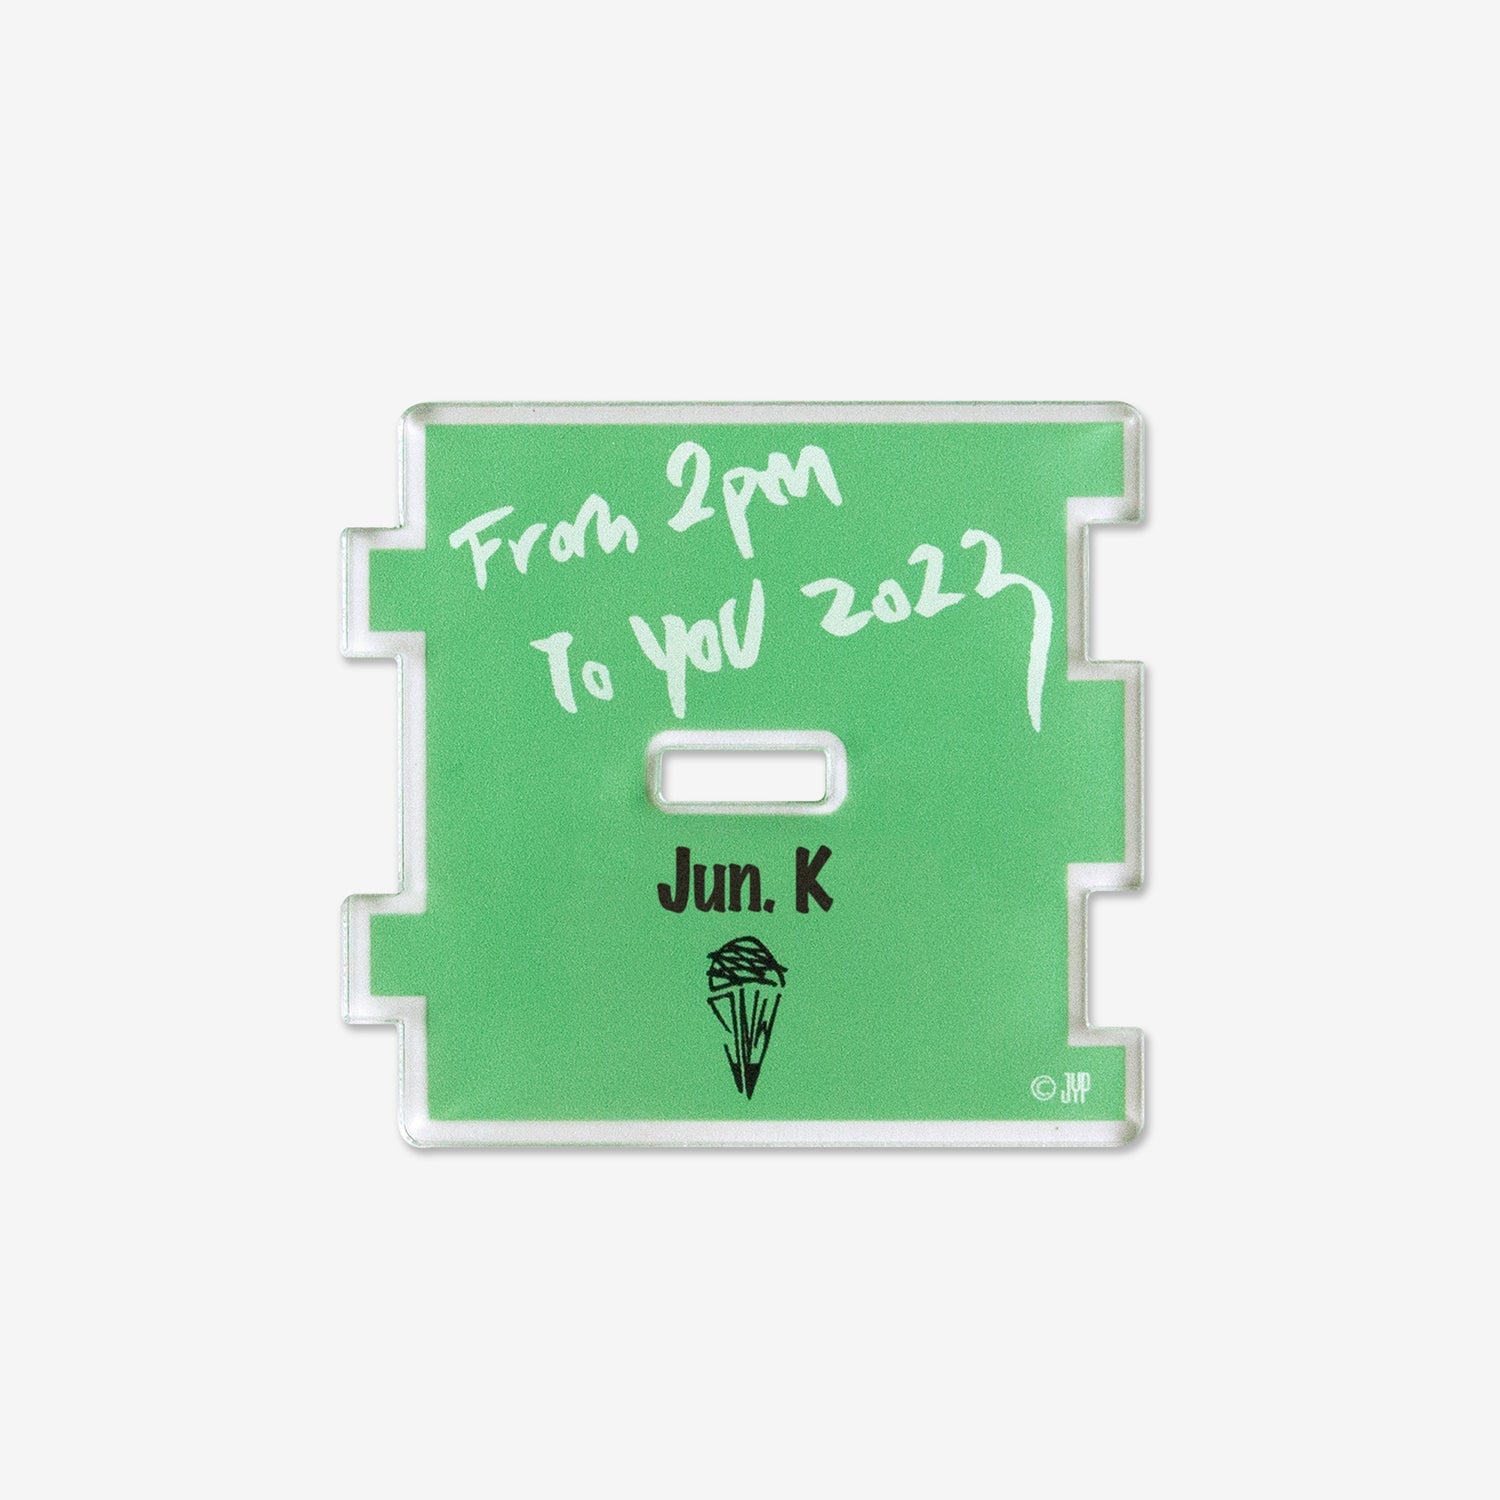 ACRYLIC STAND - Jun. K『From 2PM To You 2023』